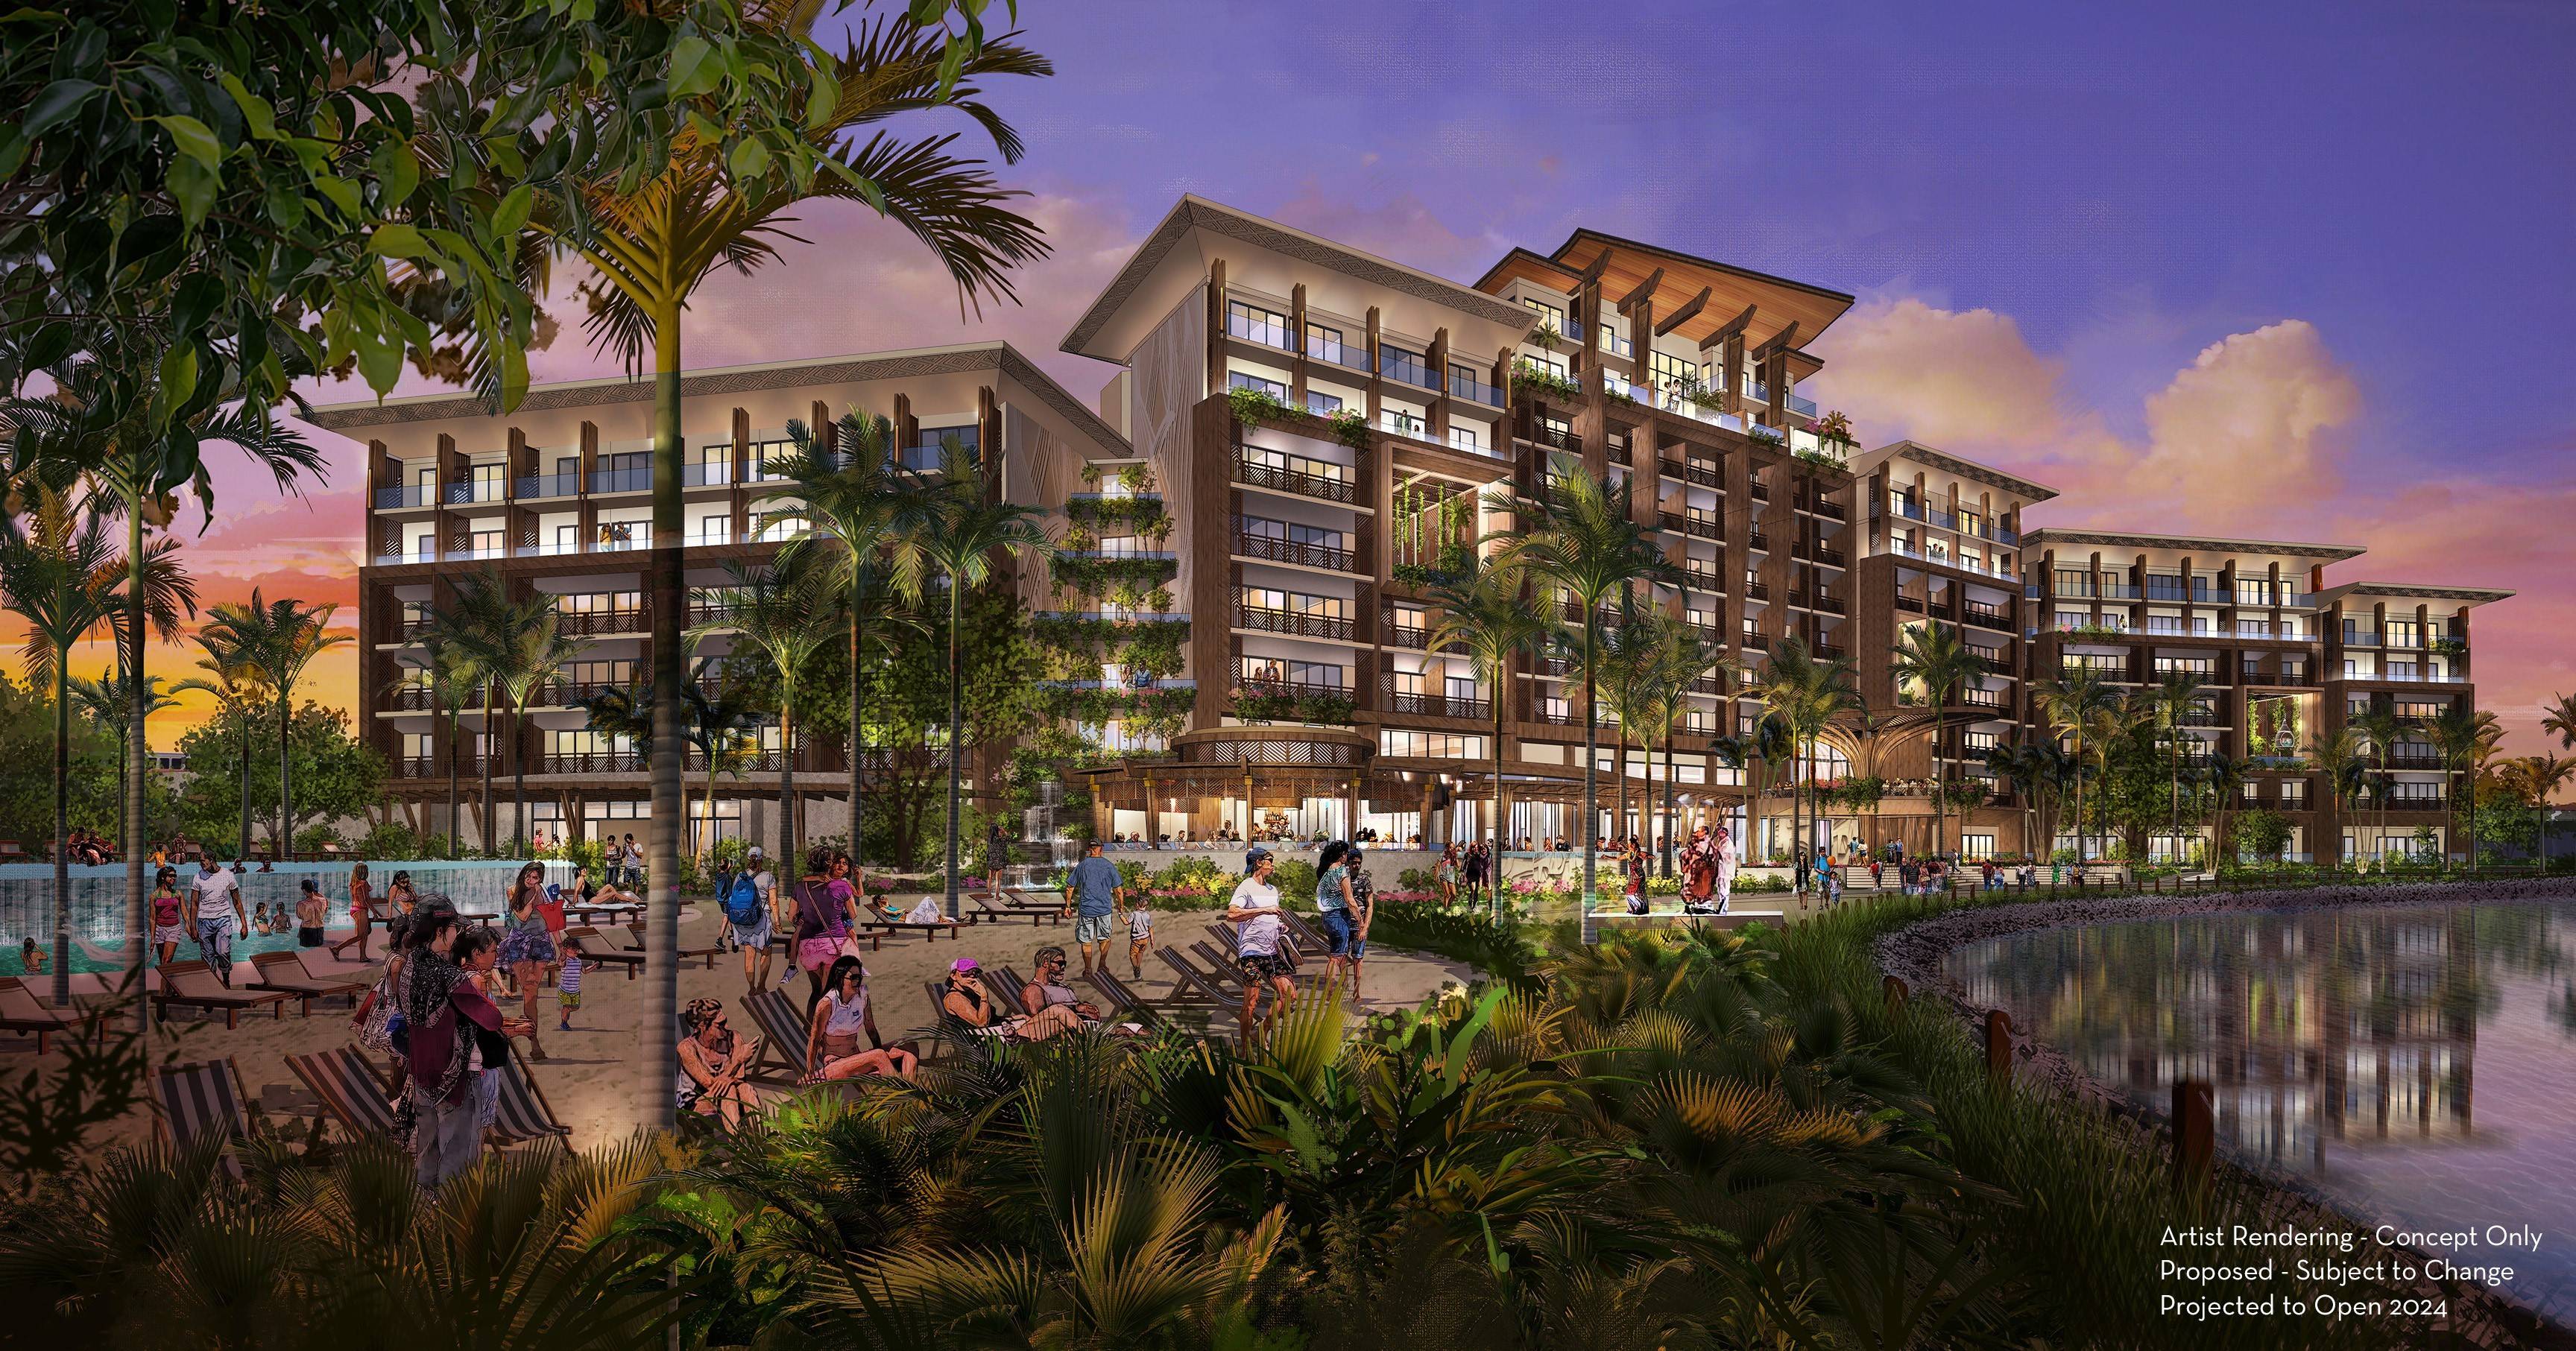 Disney Vacation Club announces plans for a new tower at Disney's Polynesian Village Resort